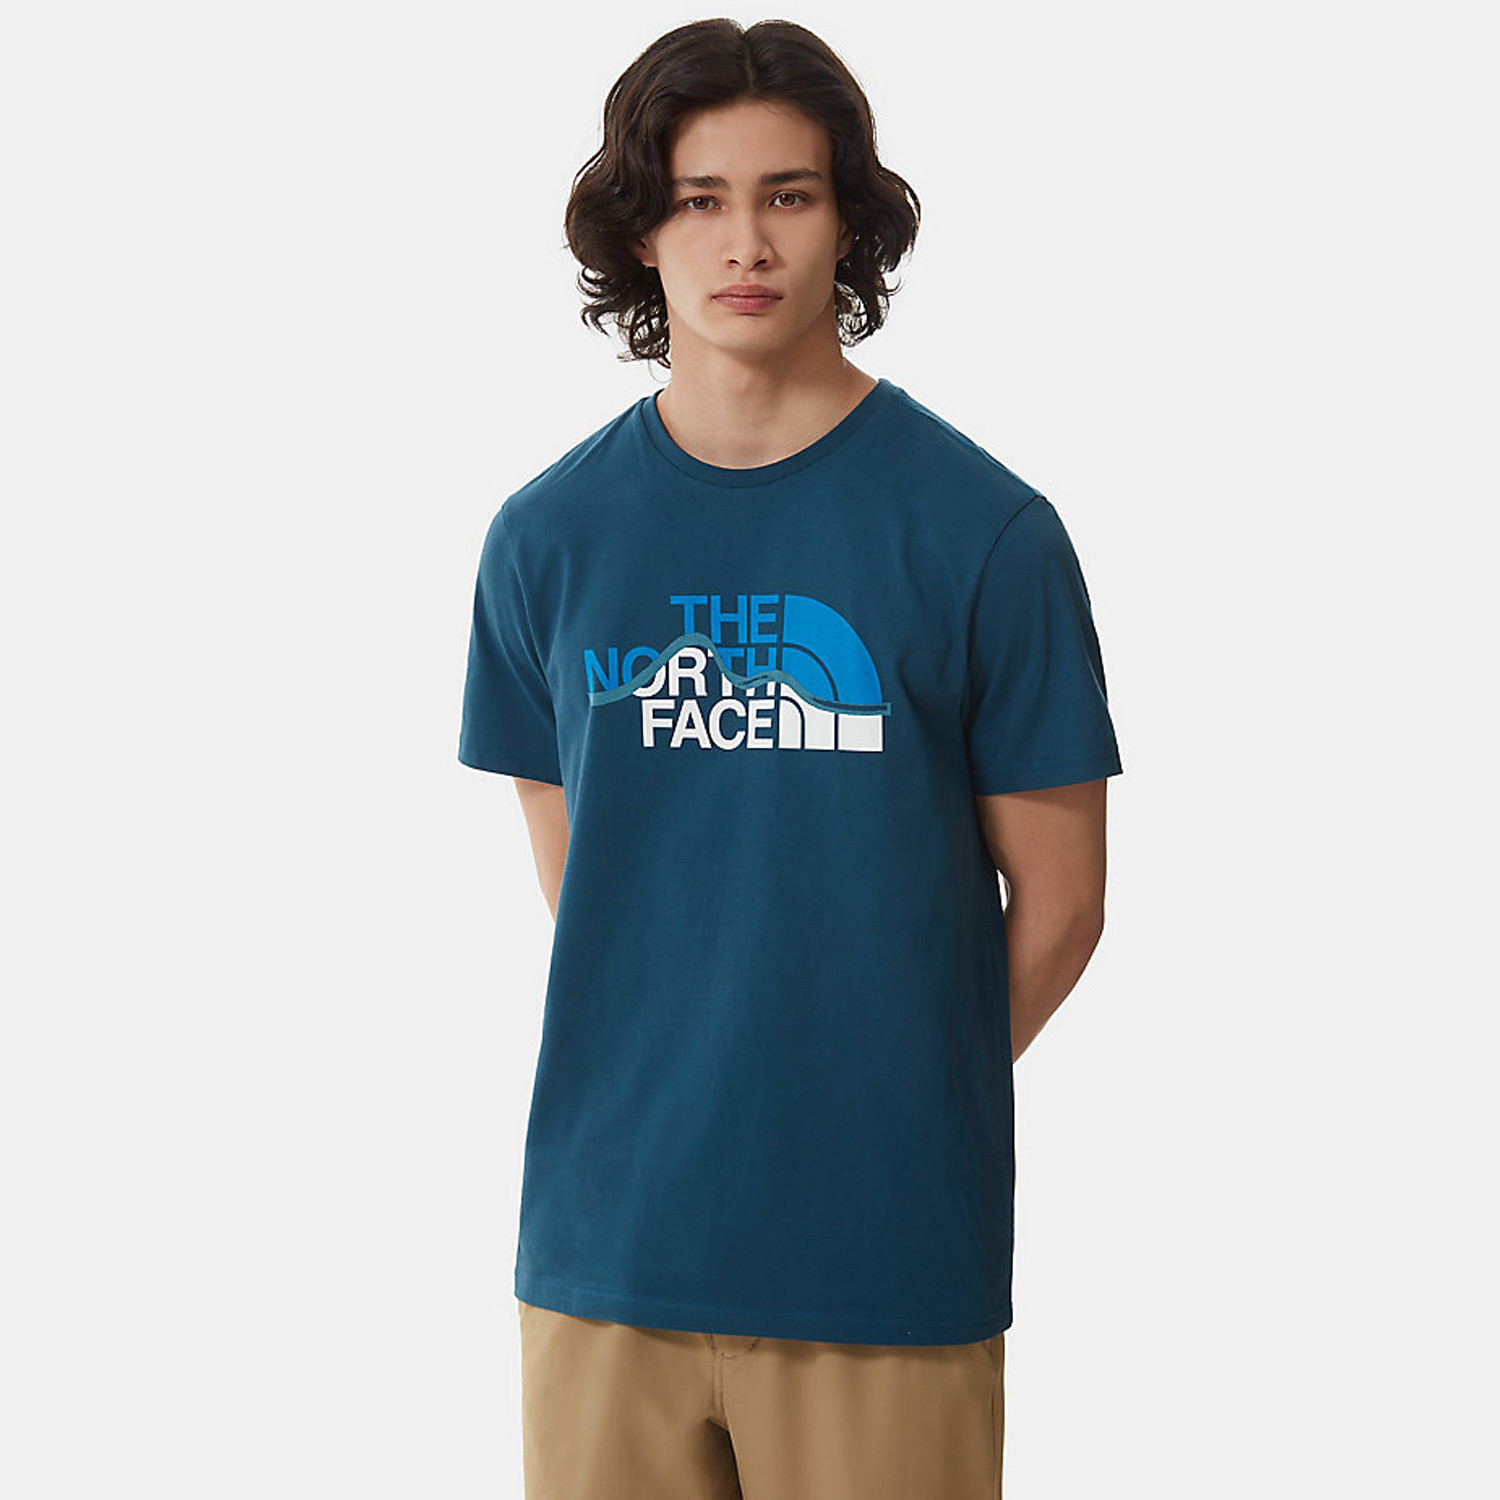 The North Face Mount Line 2 Ανδρικό T-Shirt (9000085712_54737)